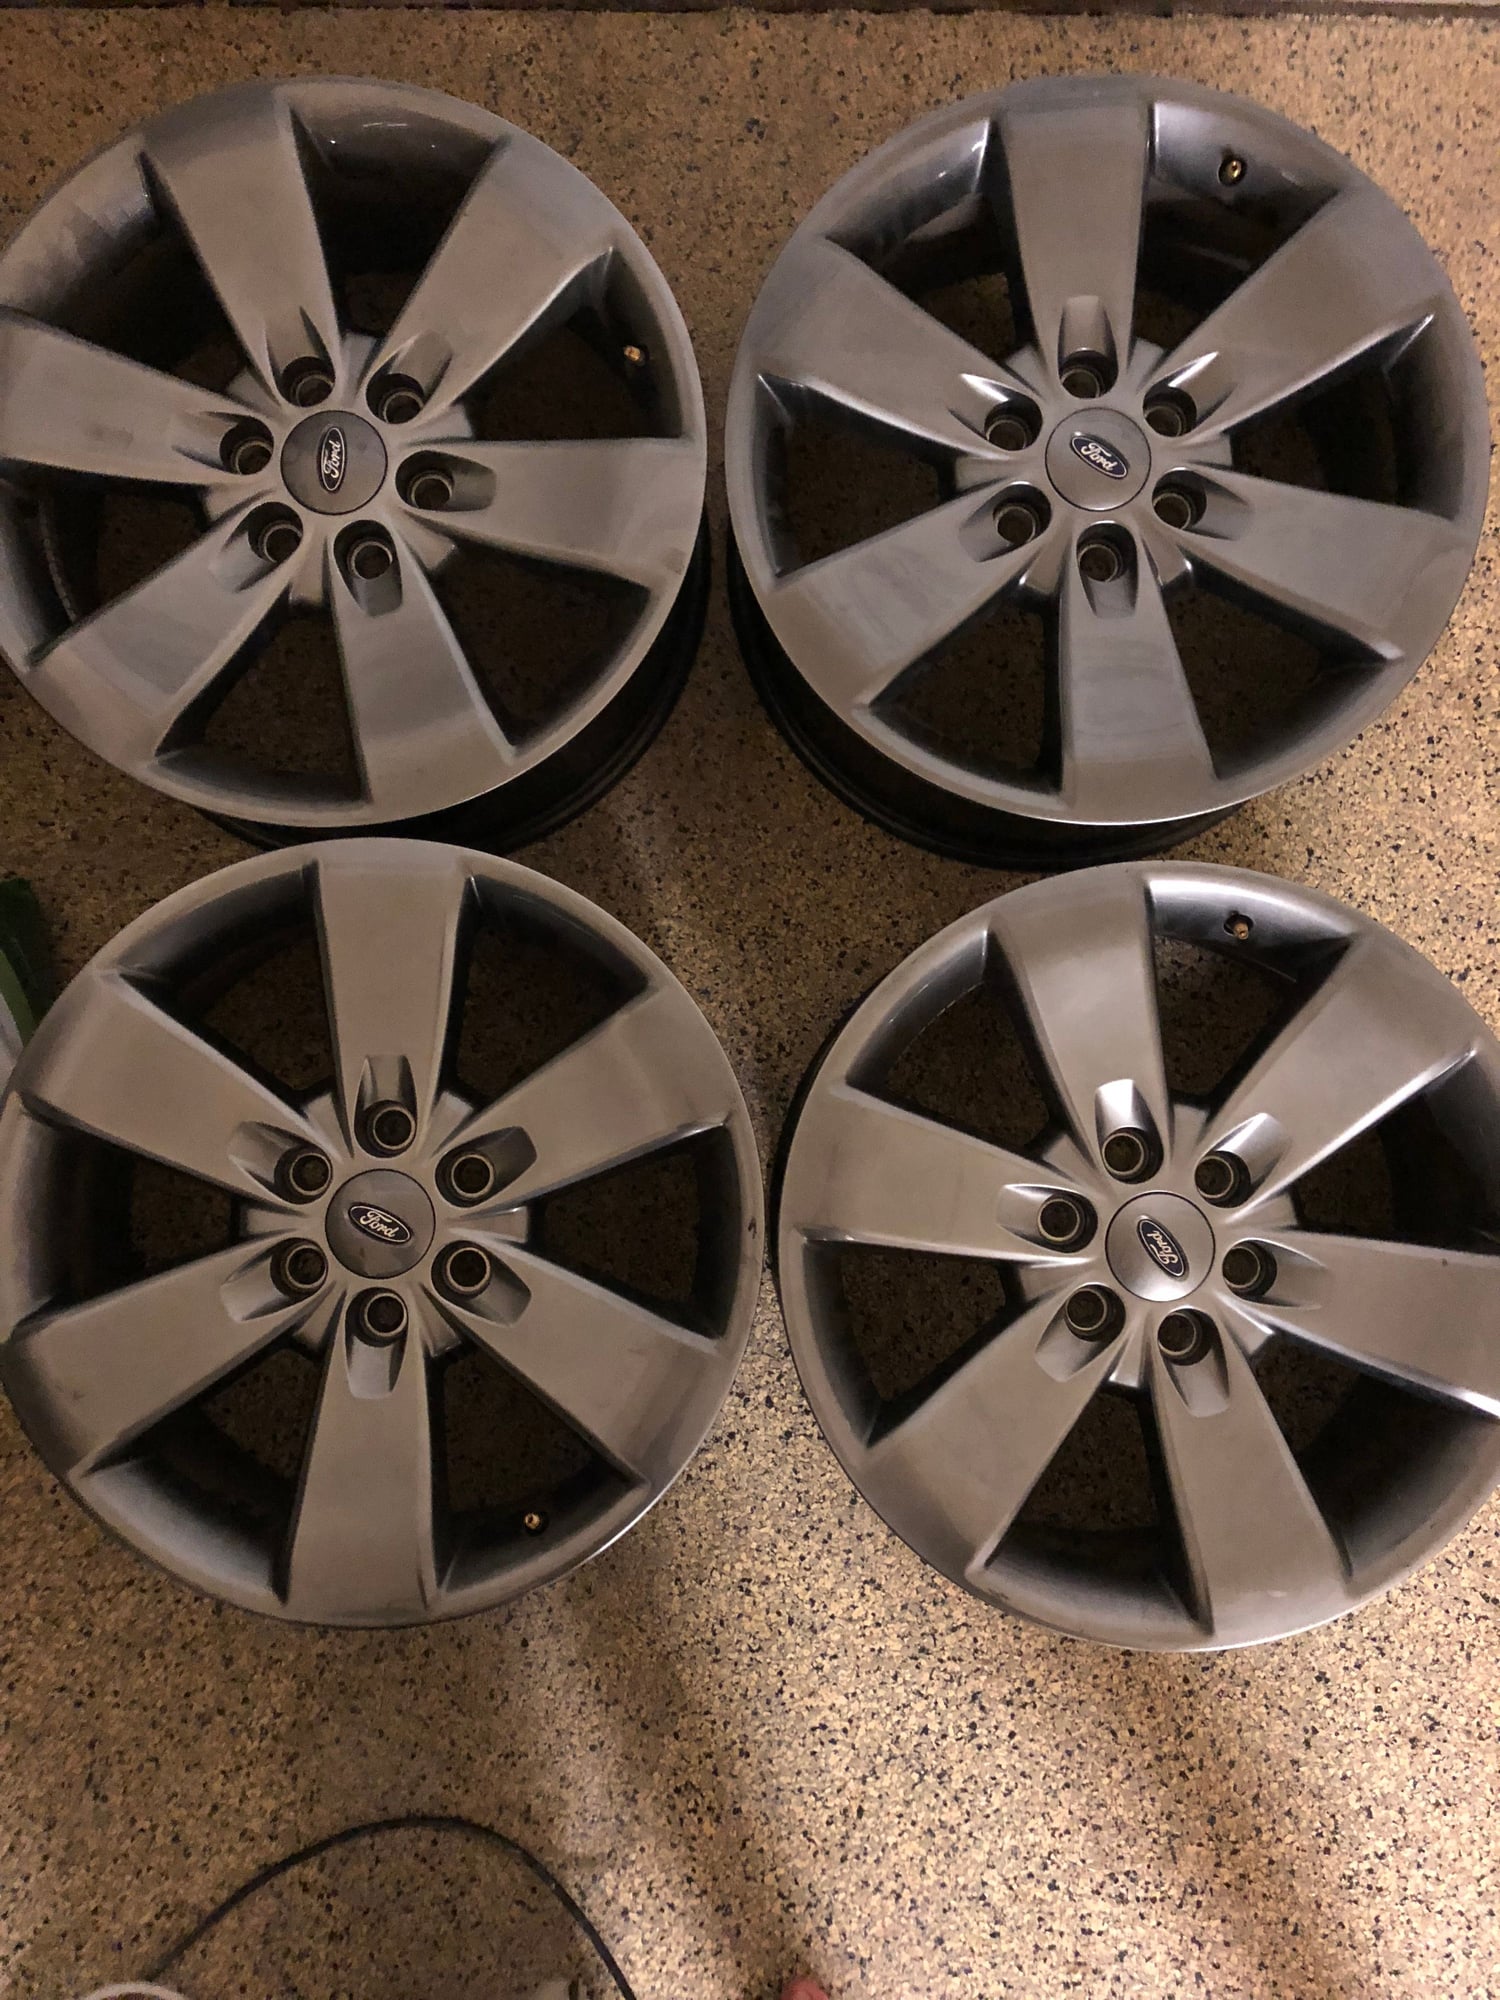 Miscellaneous - 2014 F150 FX4 20" Wheels and SCT X4 - Used - 2011 to 2014 Ford 1/2 Ton Pickup - Ione, CA 95640, United States